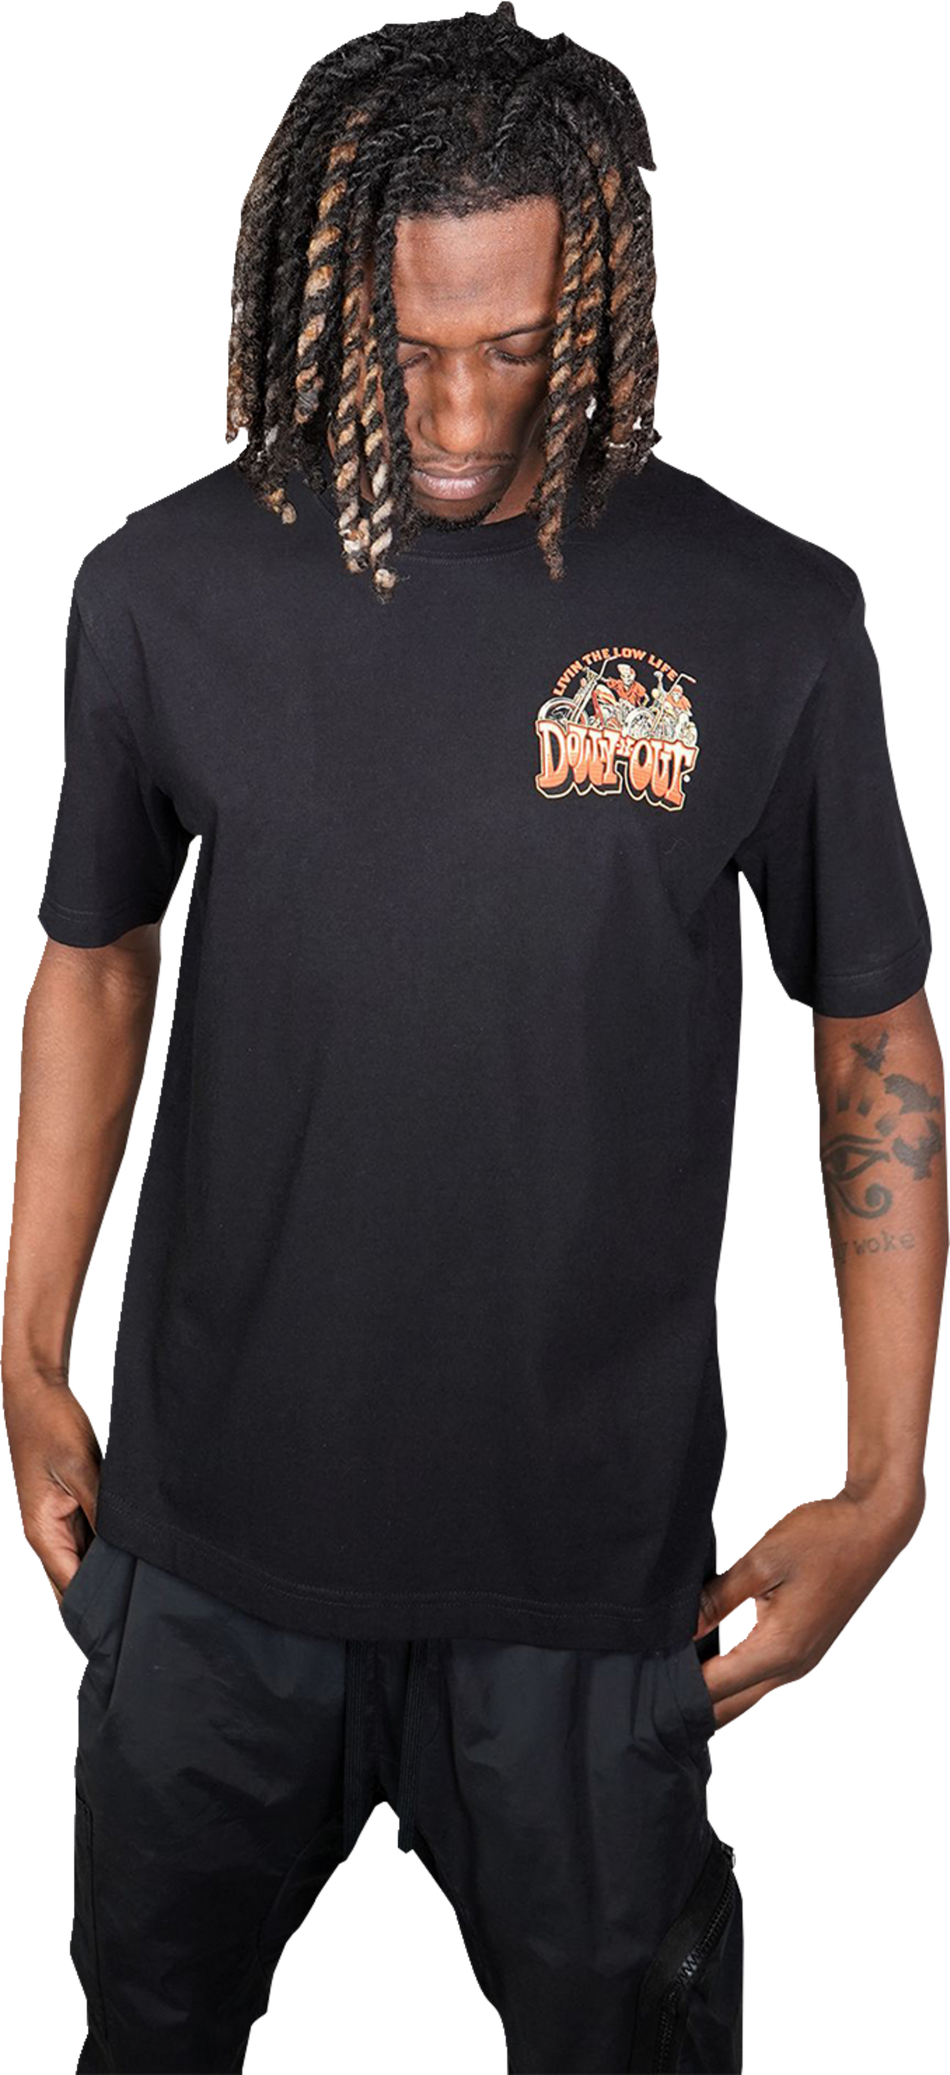 LETHAL THREAT Down-N-Out 4 Life T-Shirt - Black - Small DT10044S